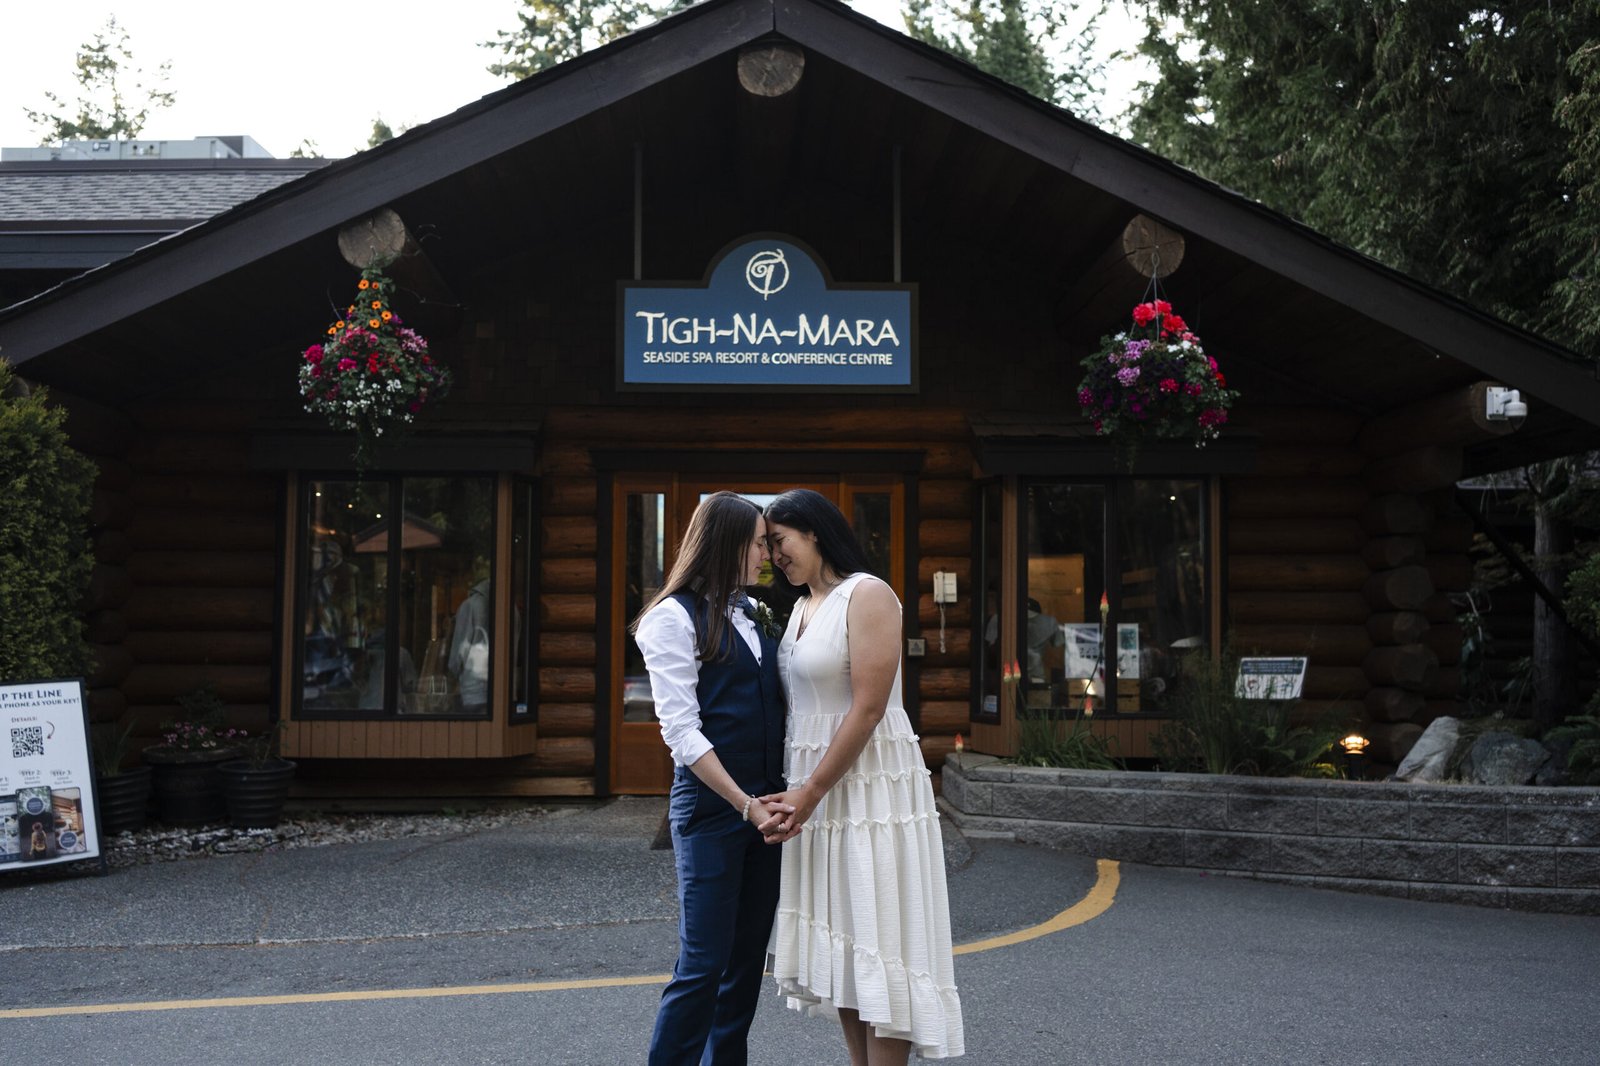 Tigh-Na-Mara couple in front of lodge